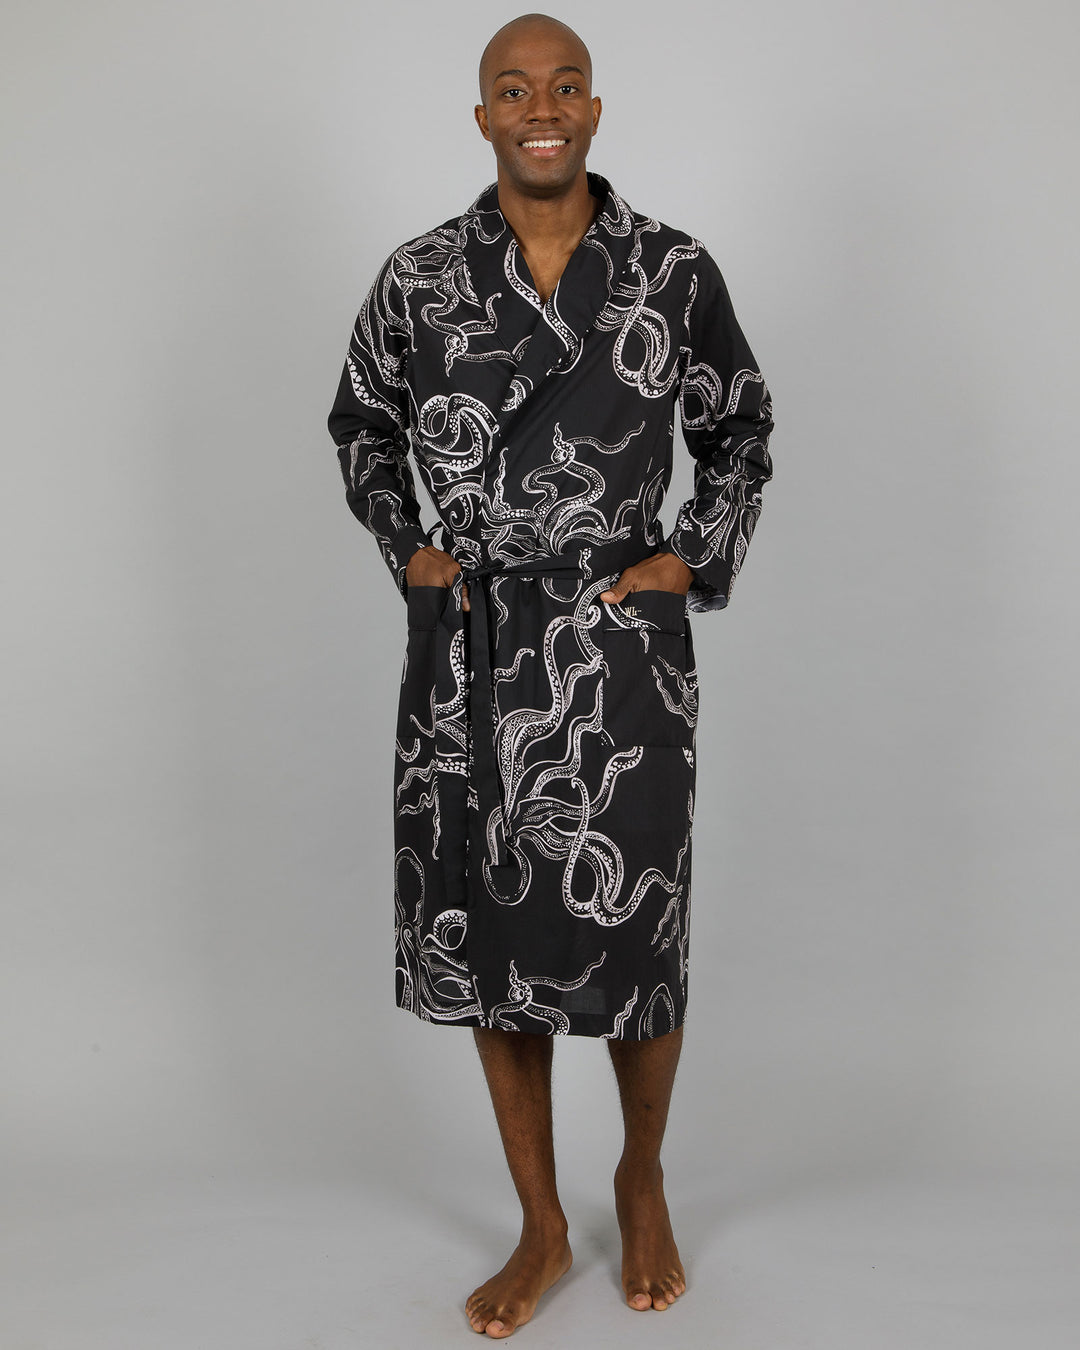 Mens Gown Octopus Black Front - Woodstock Laundry